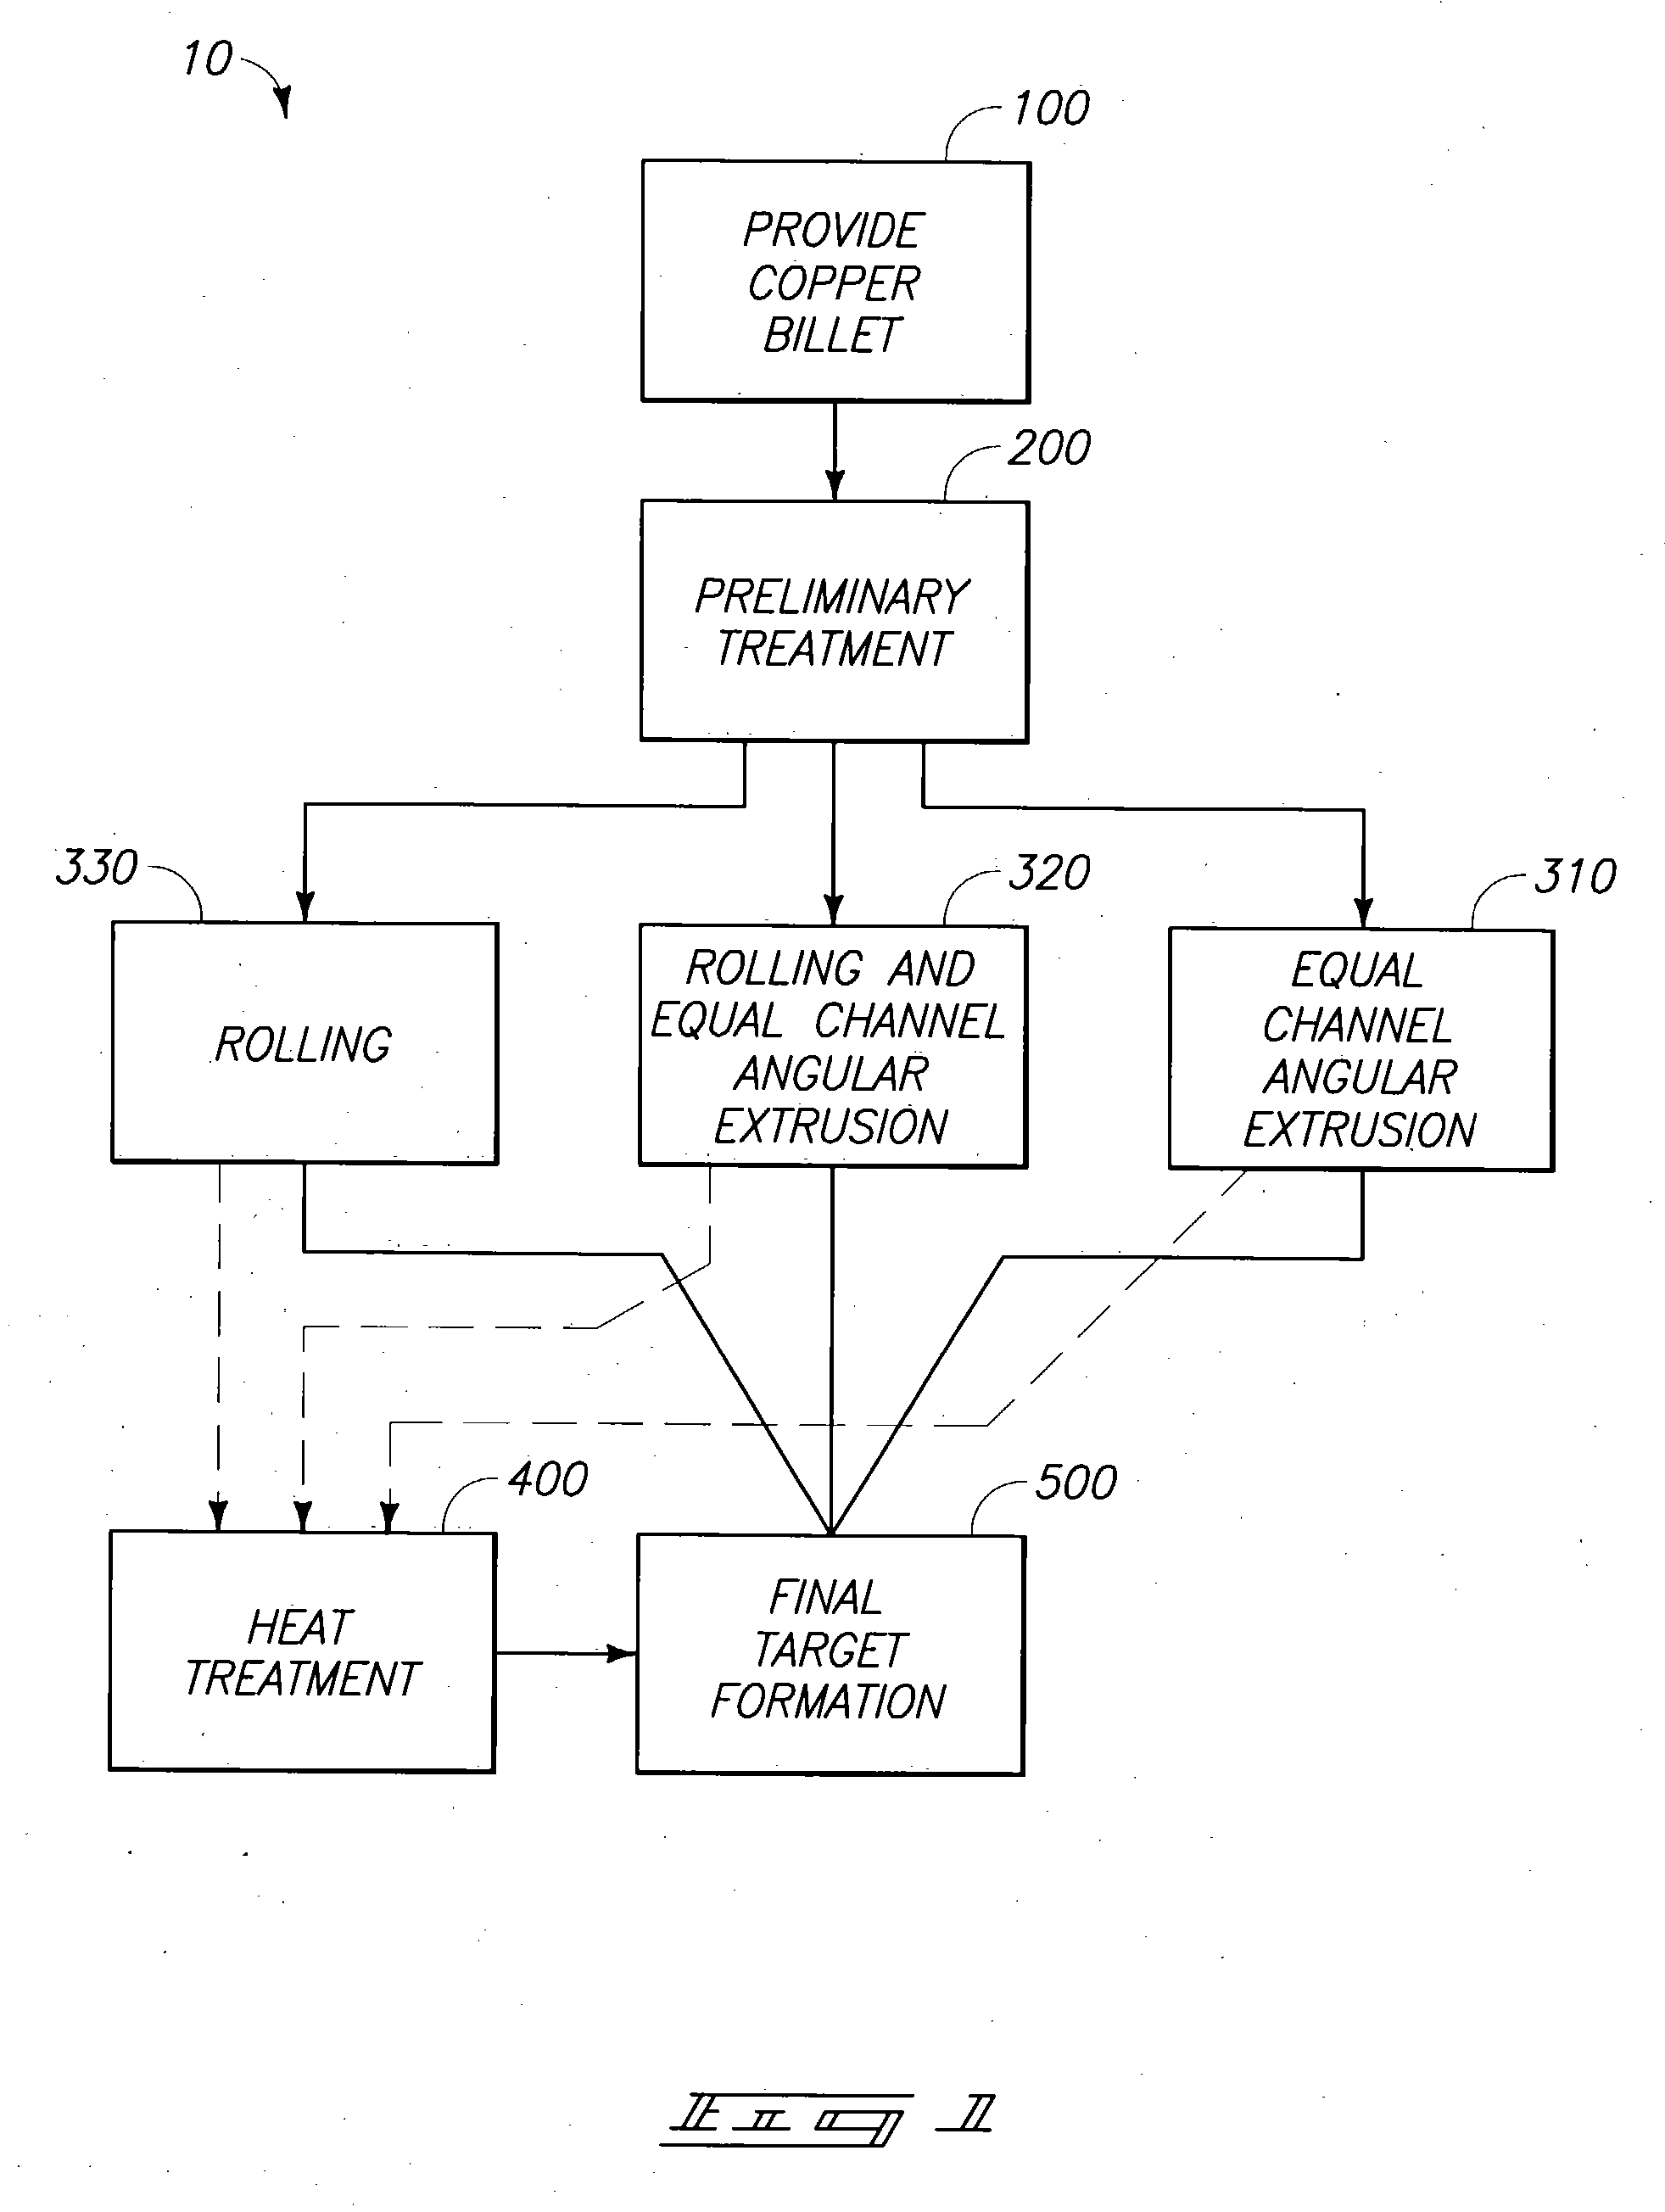 Copper sputtering targets and methods of forming copper sputtering targets